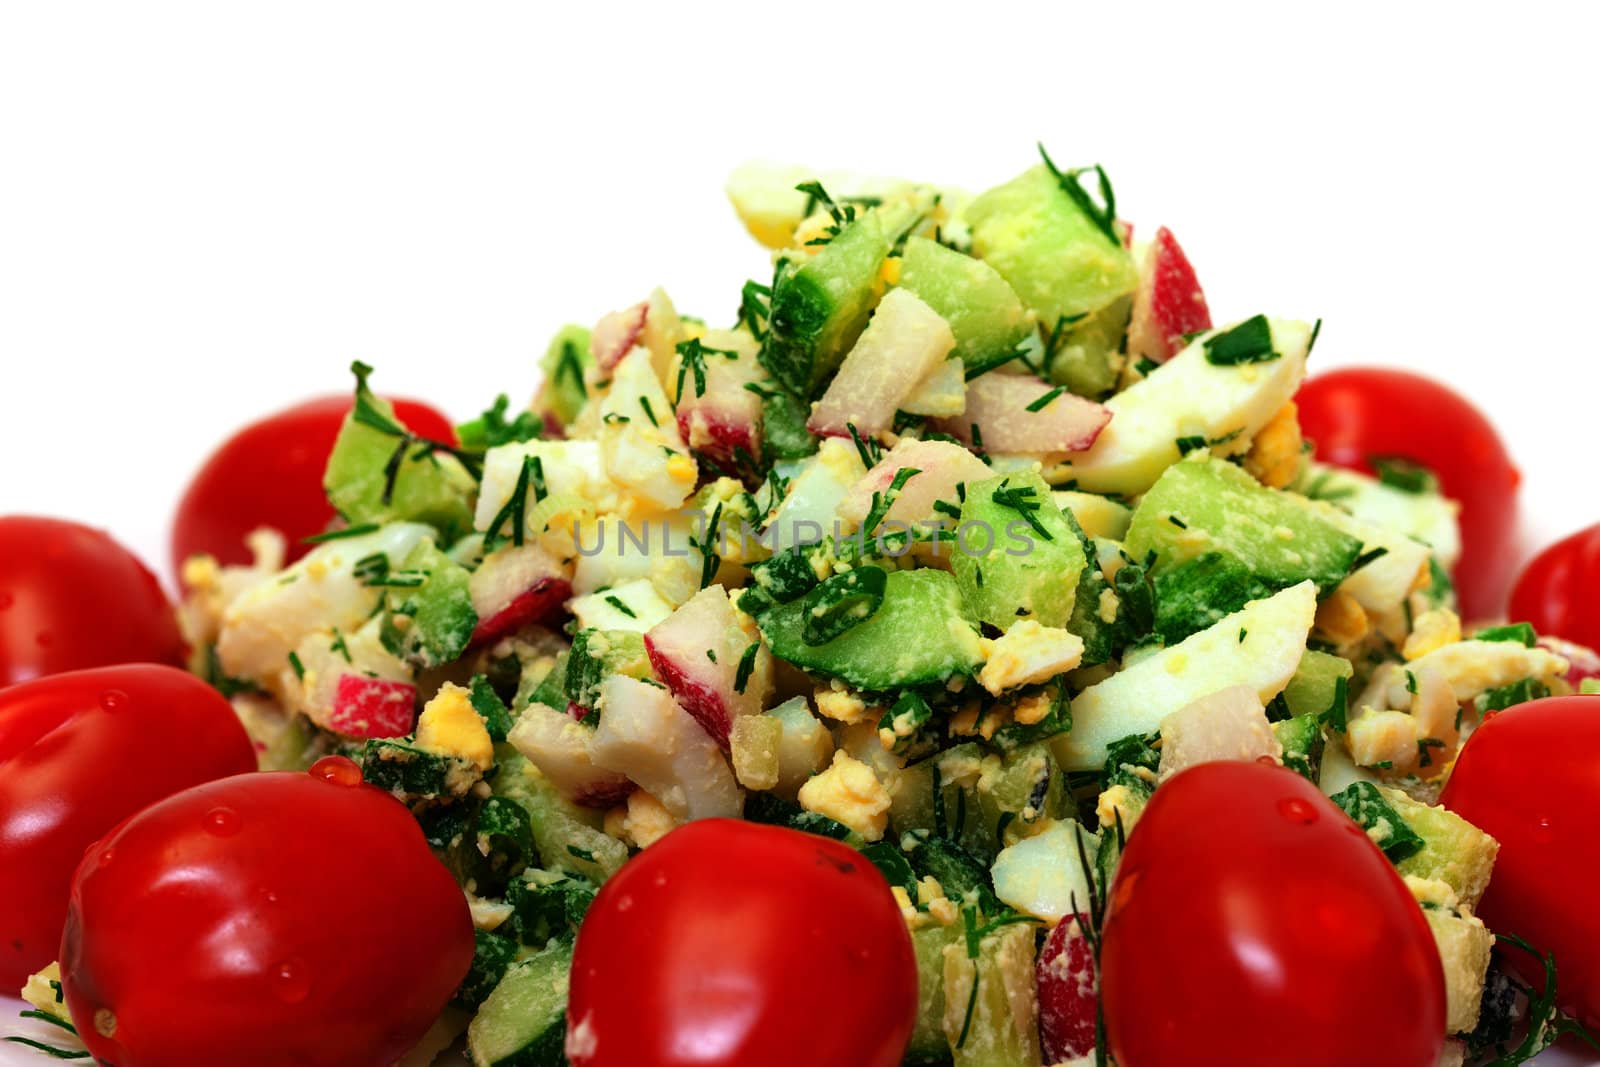 Salad with potatoes, eggs, cherry tomatoes, closeup on white background